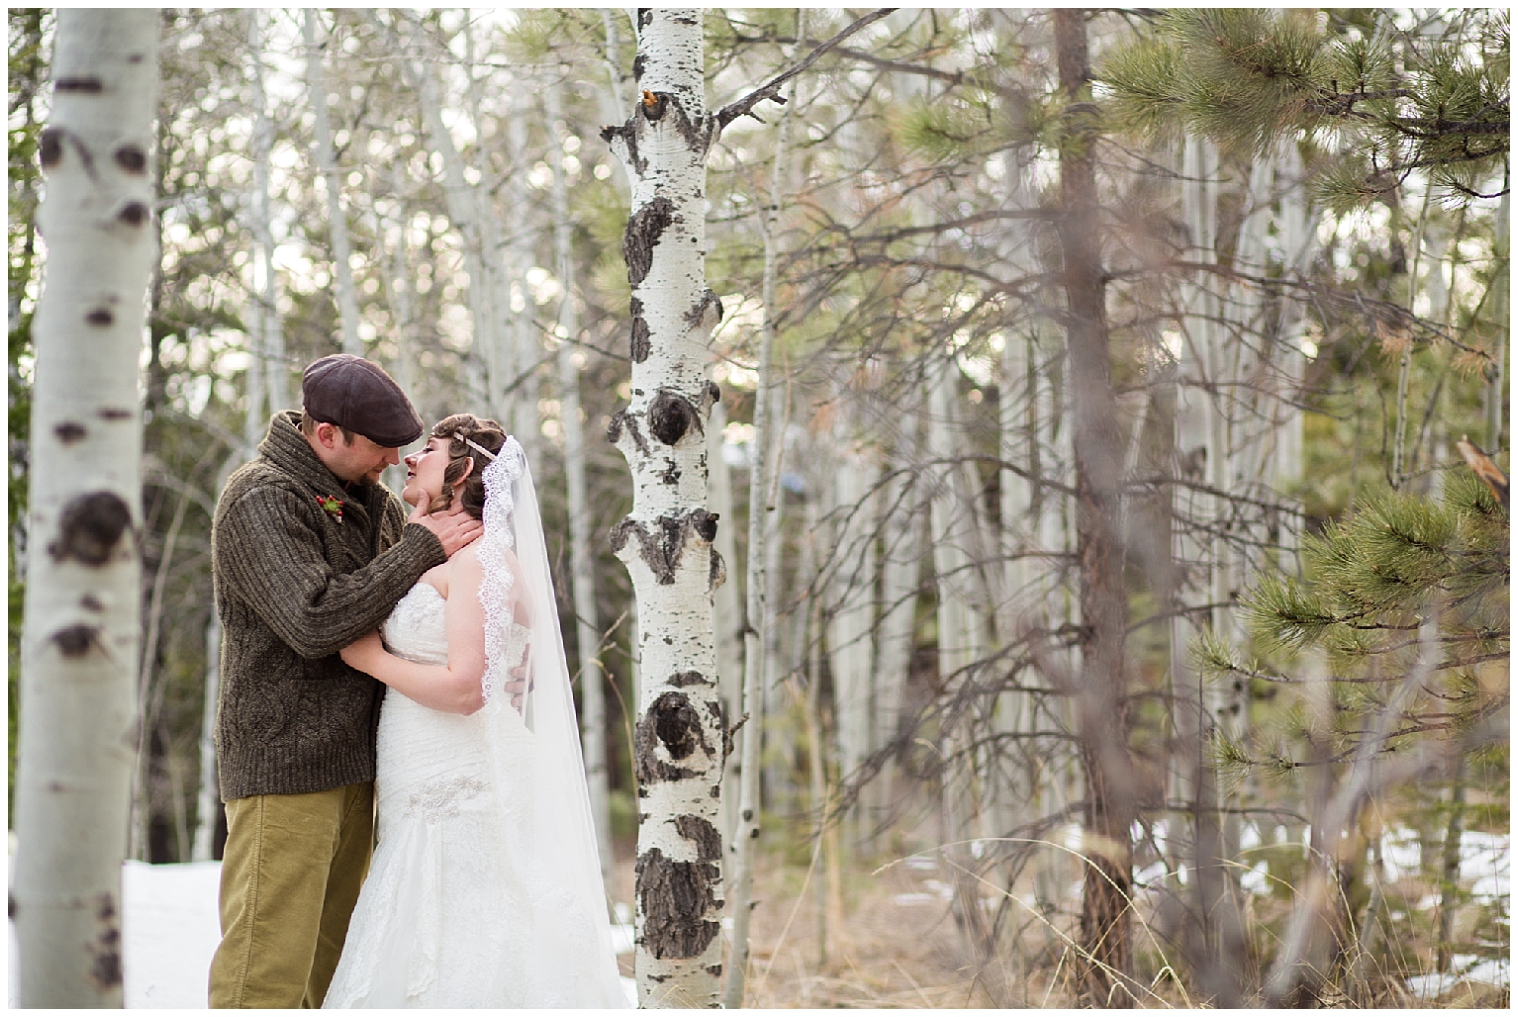 The wedding couple lean in for a kiss amount the trees at their Boulder elopement.